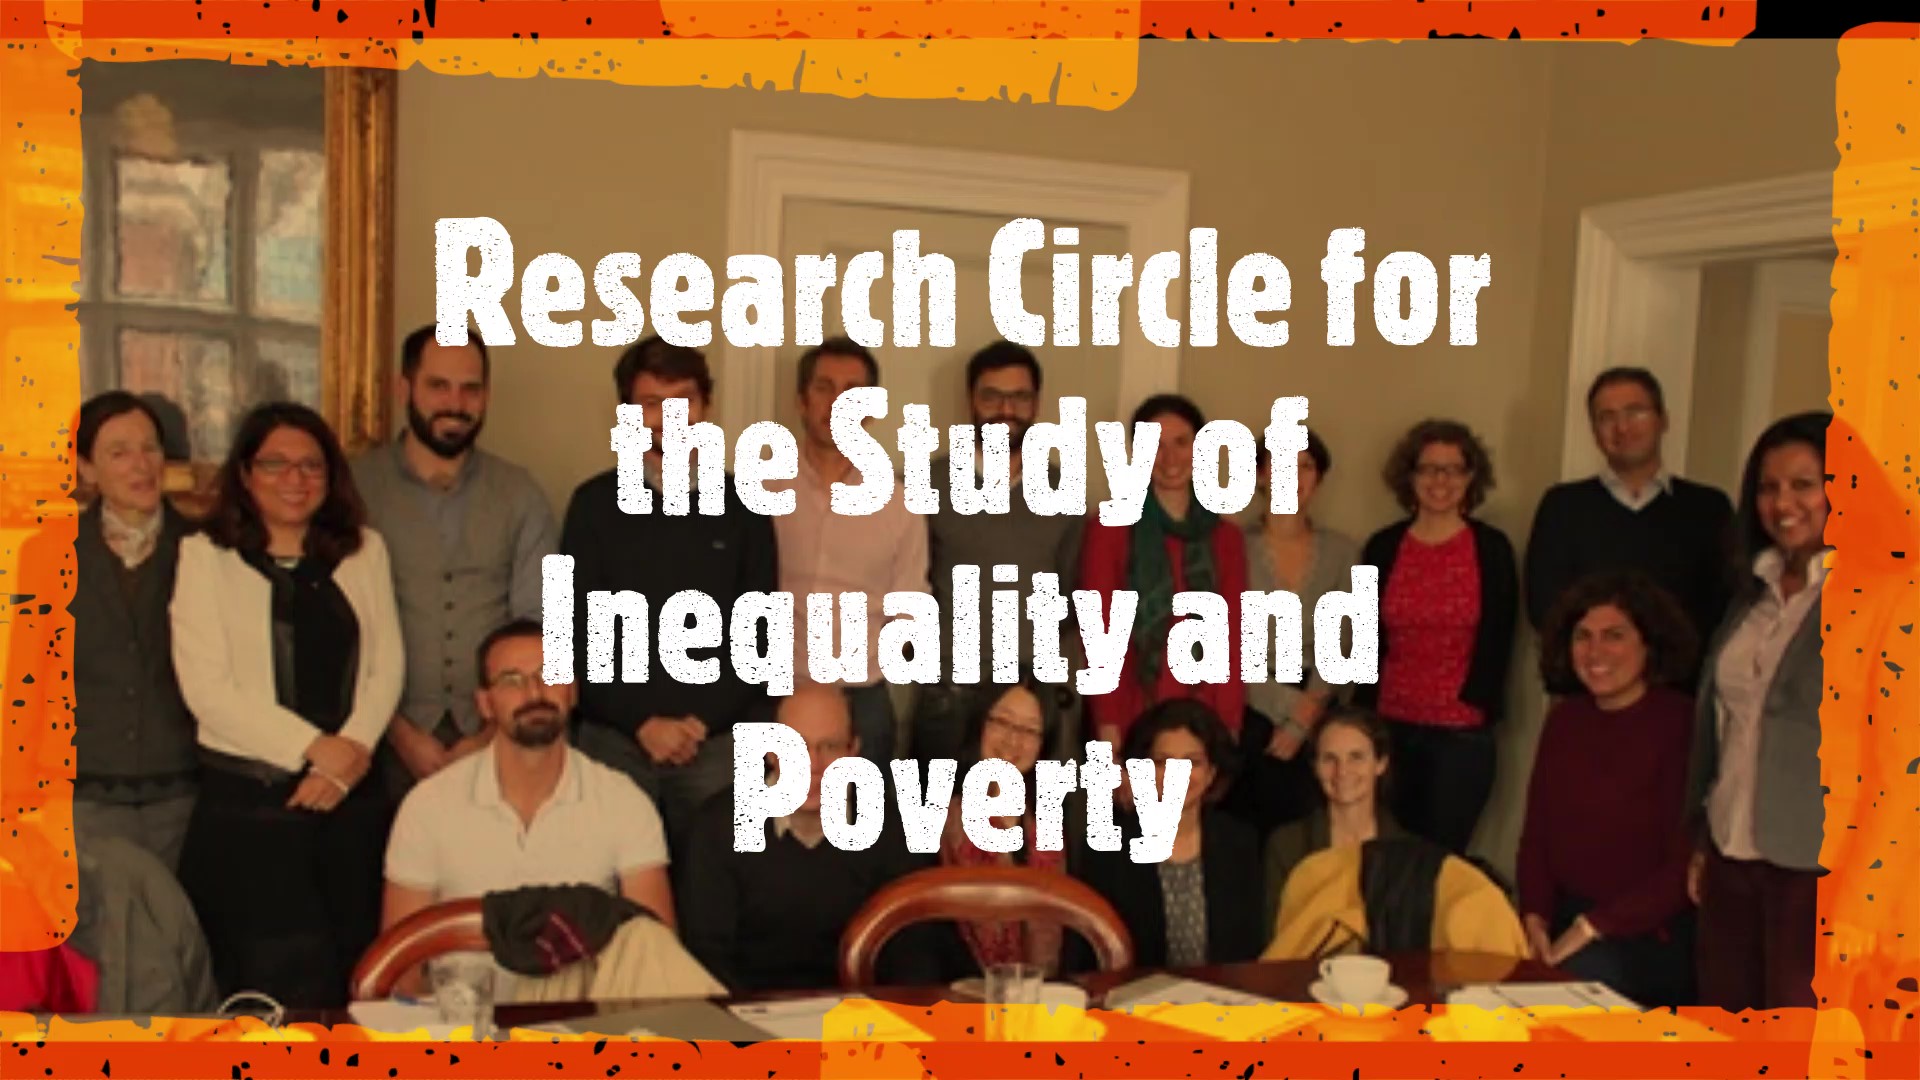 Research Circle for the Study of Inequality and Poverty